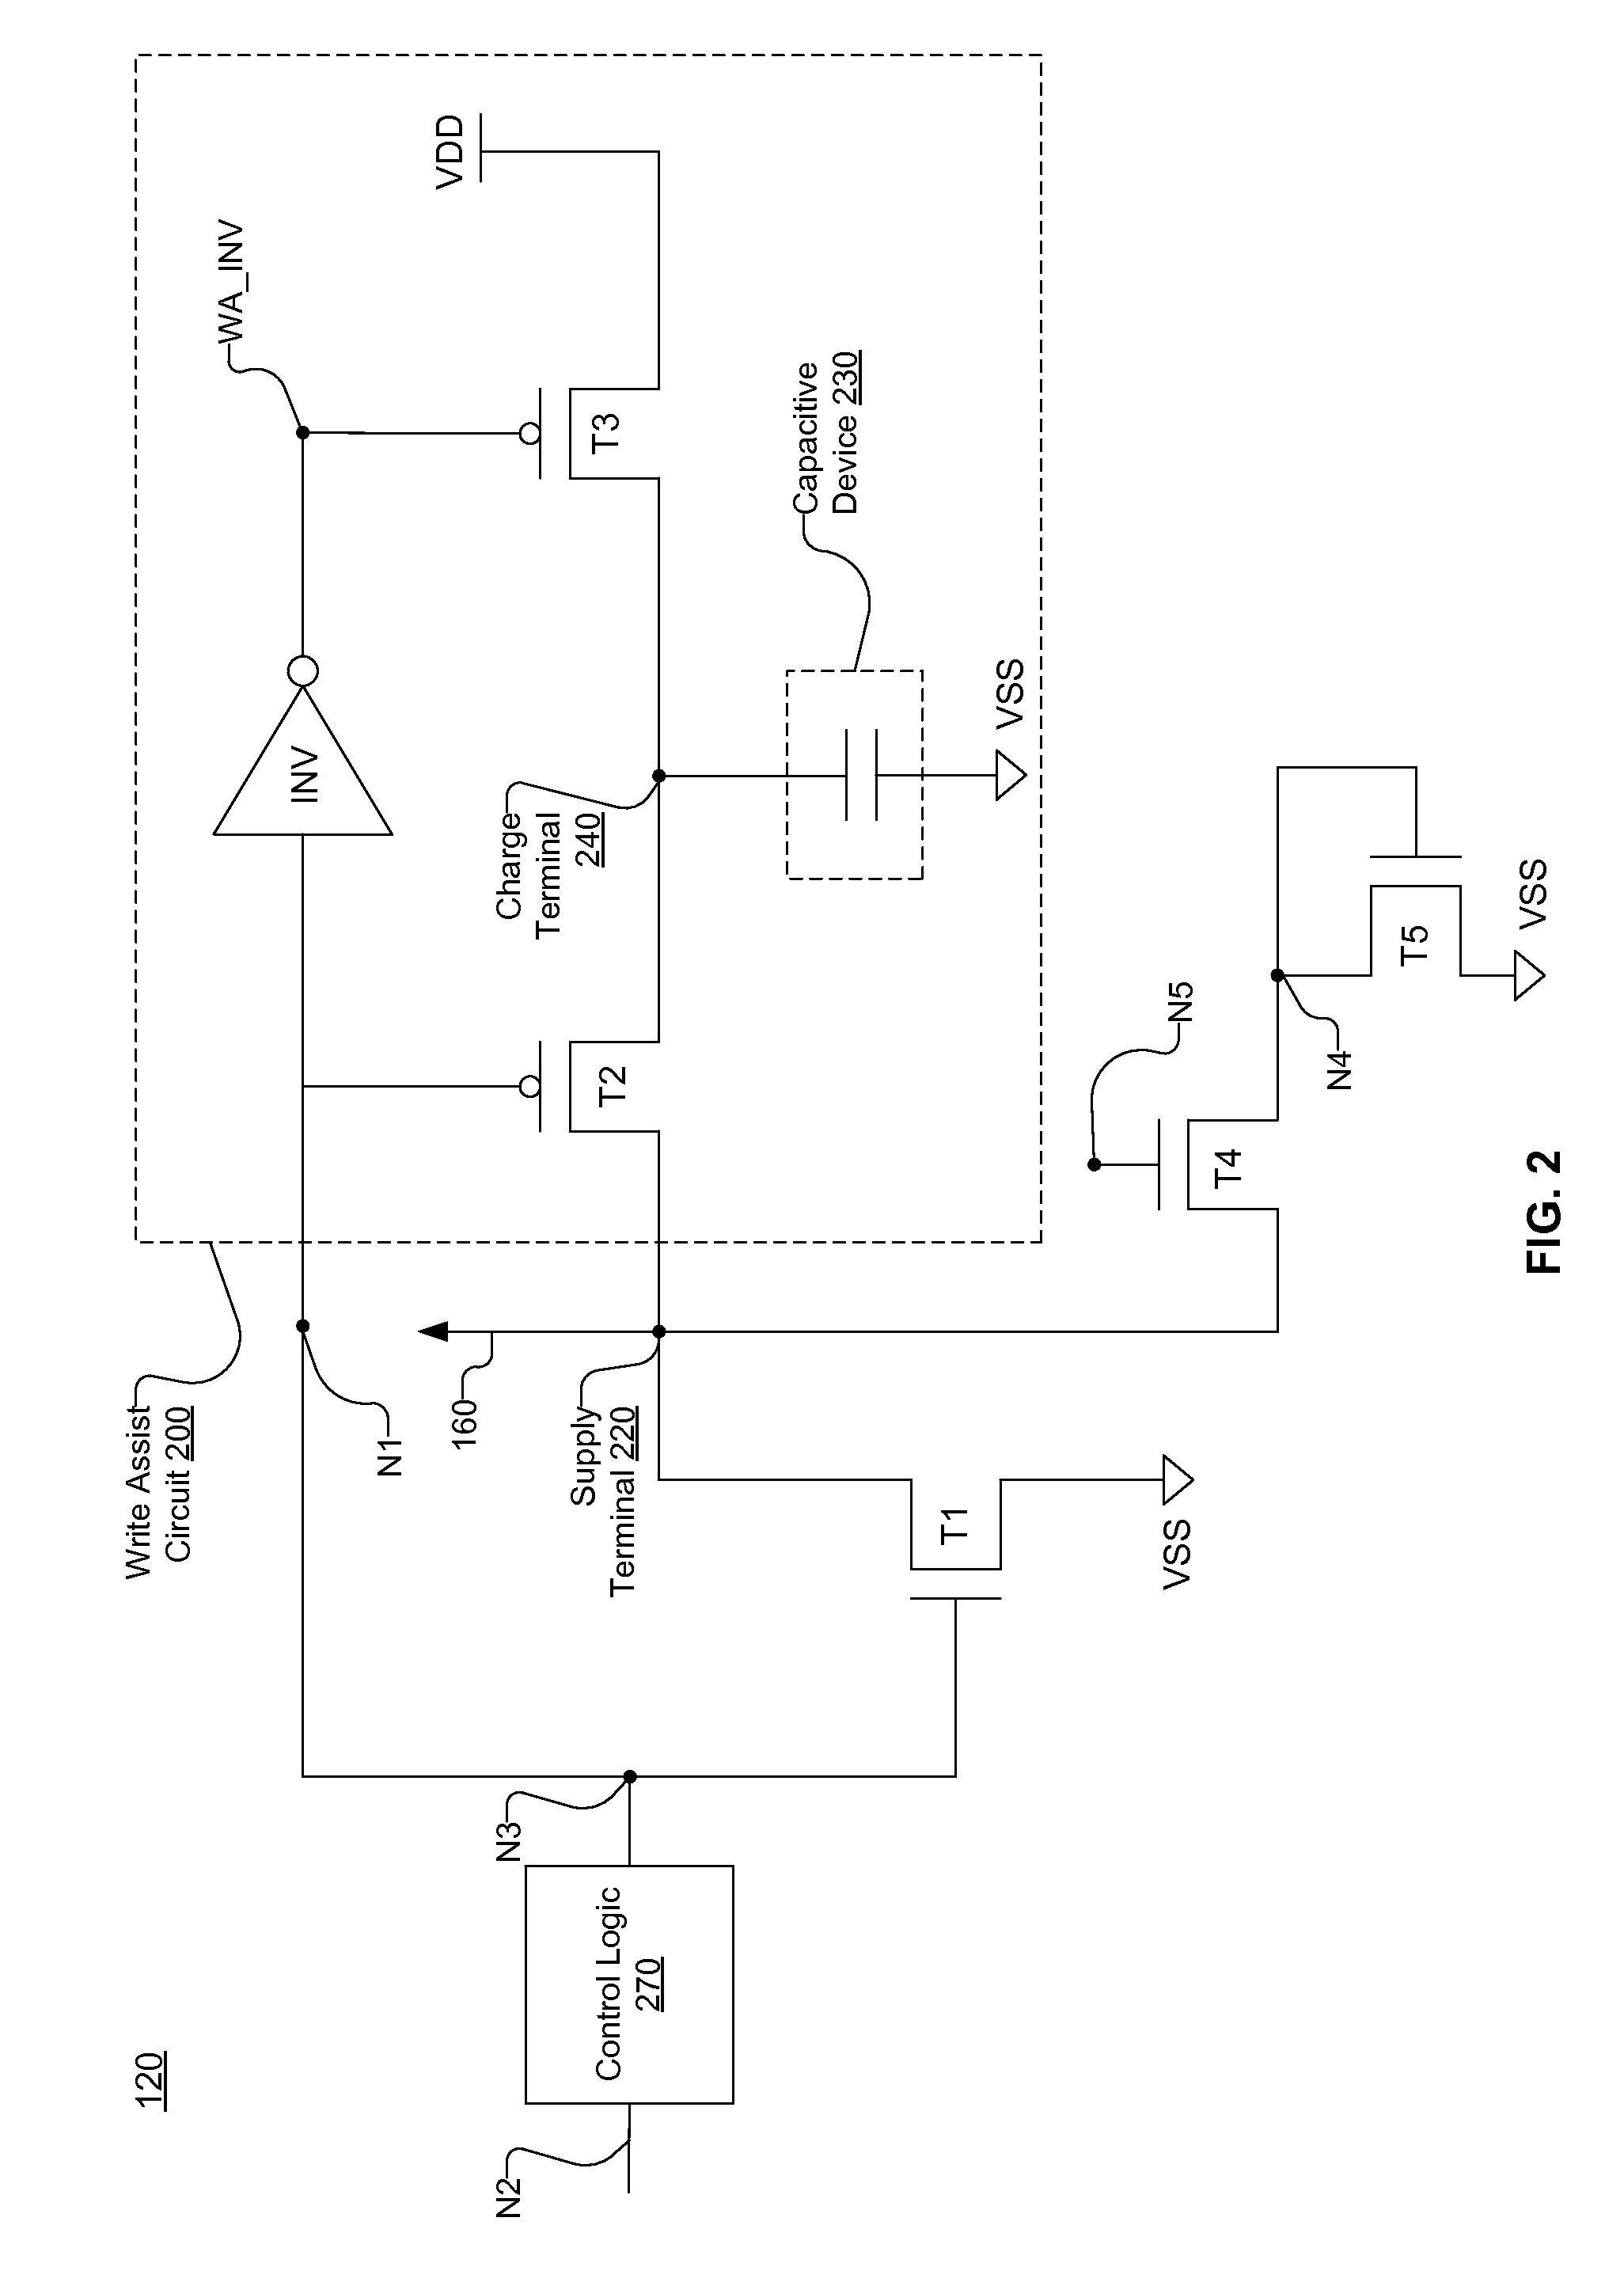 Write assist circuit integrated with leakage reduction circuit of a static random access memory for increasing the low voltage supply during write operations